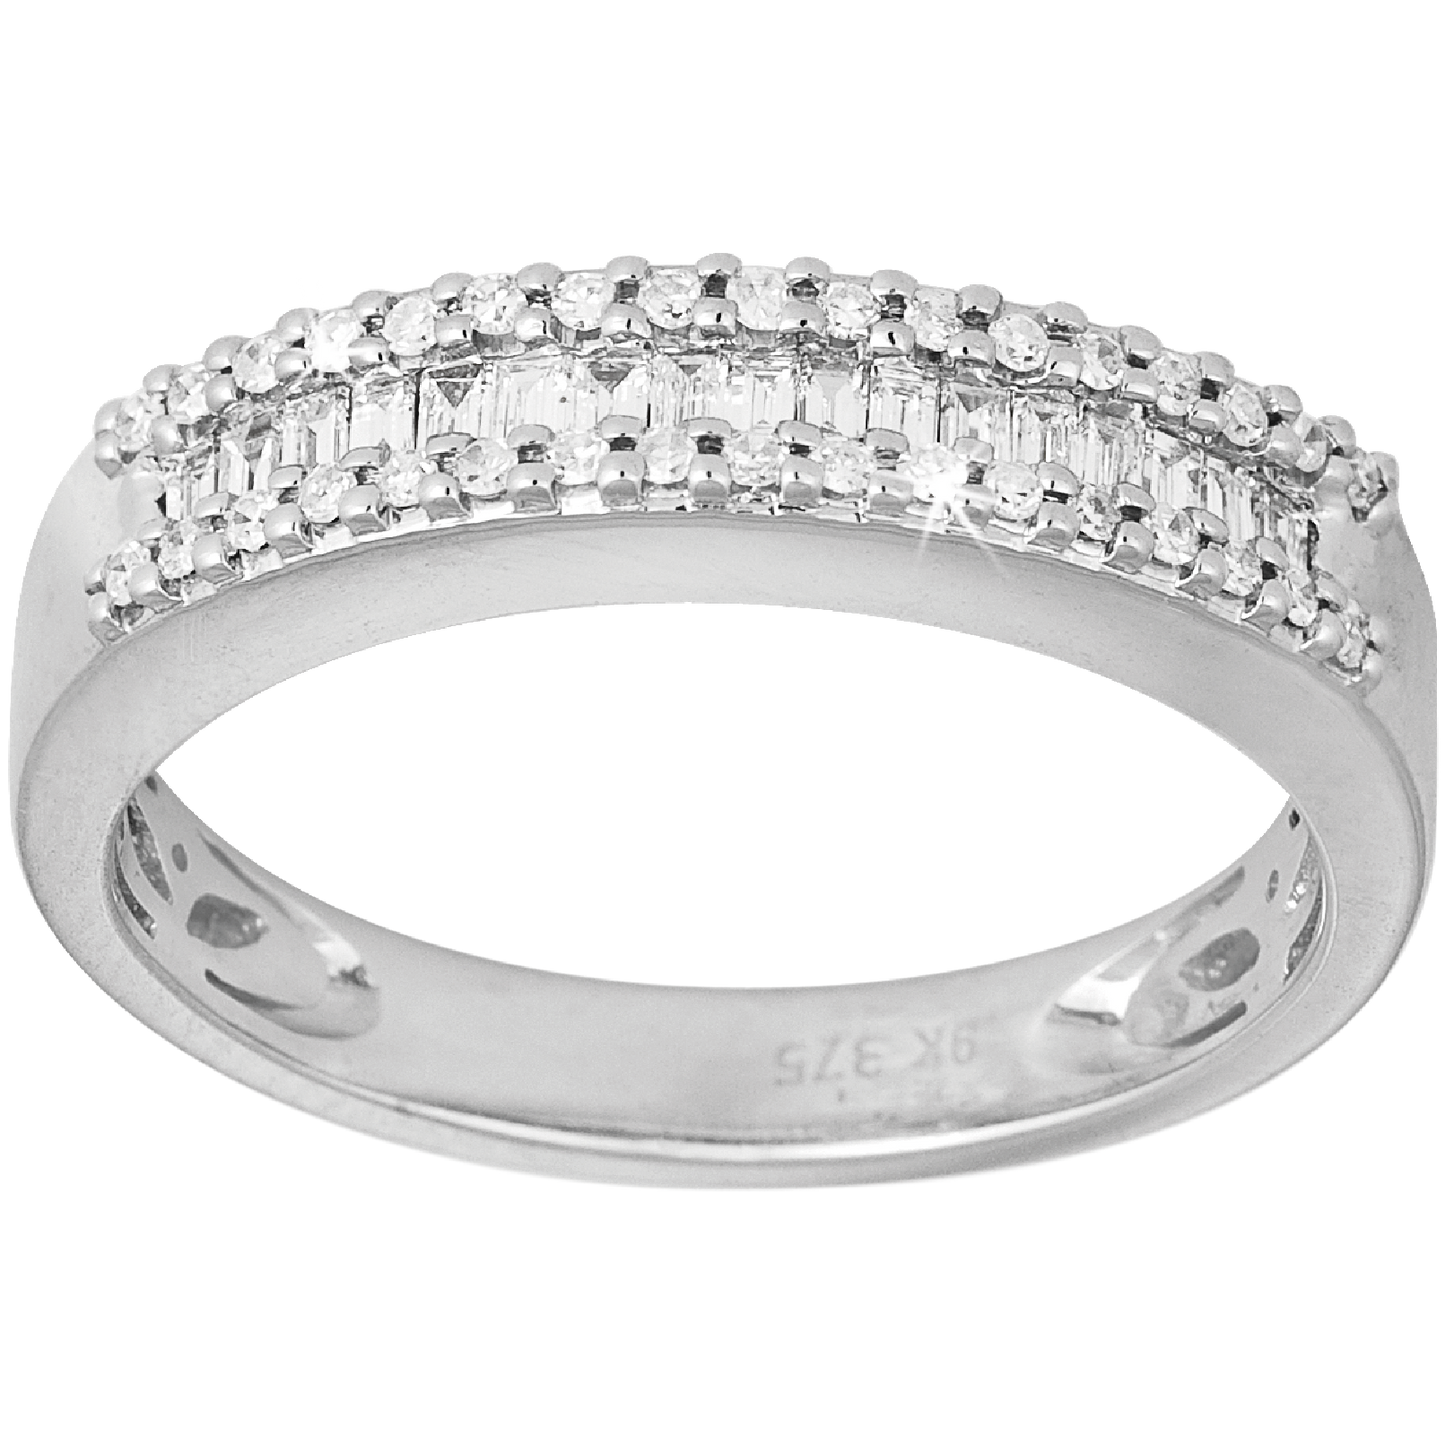 0.10ct Diamond Baguette Eternity Wedding Band Ring in 9ct White Gold